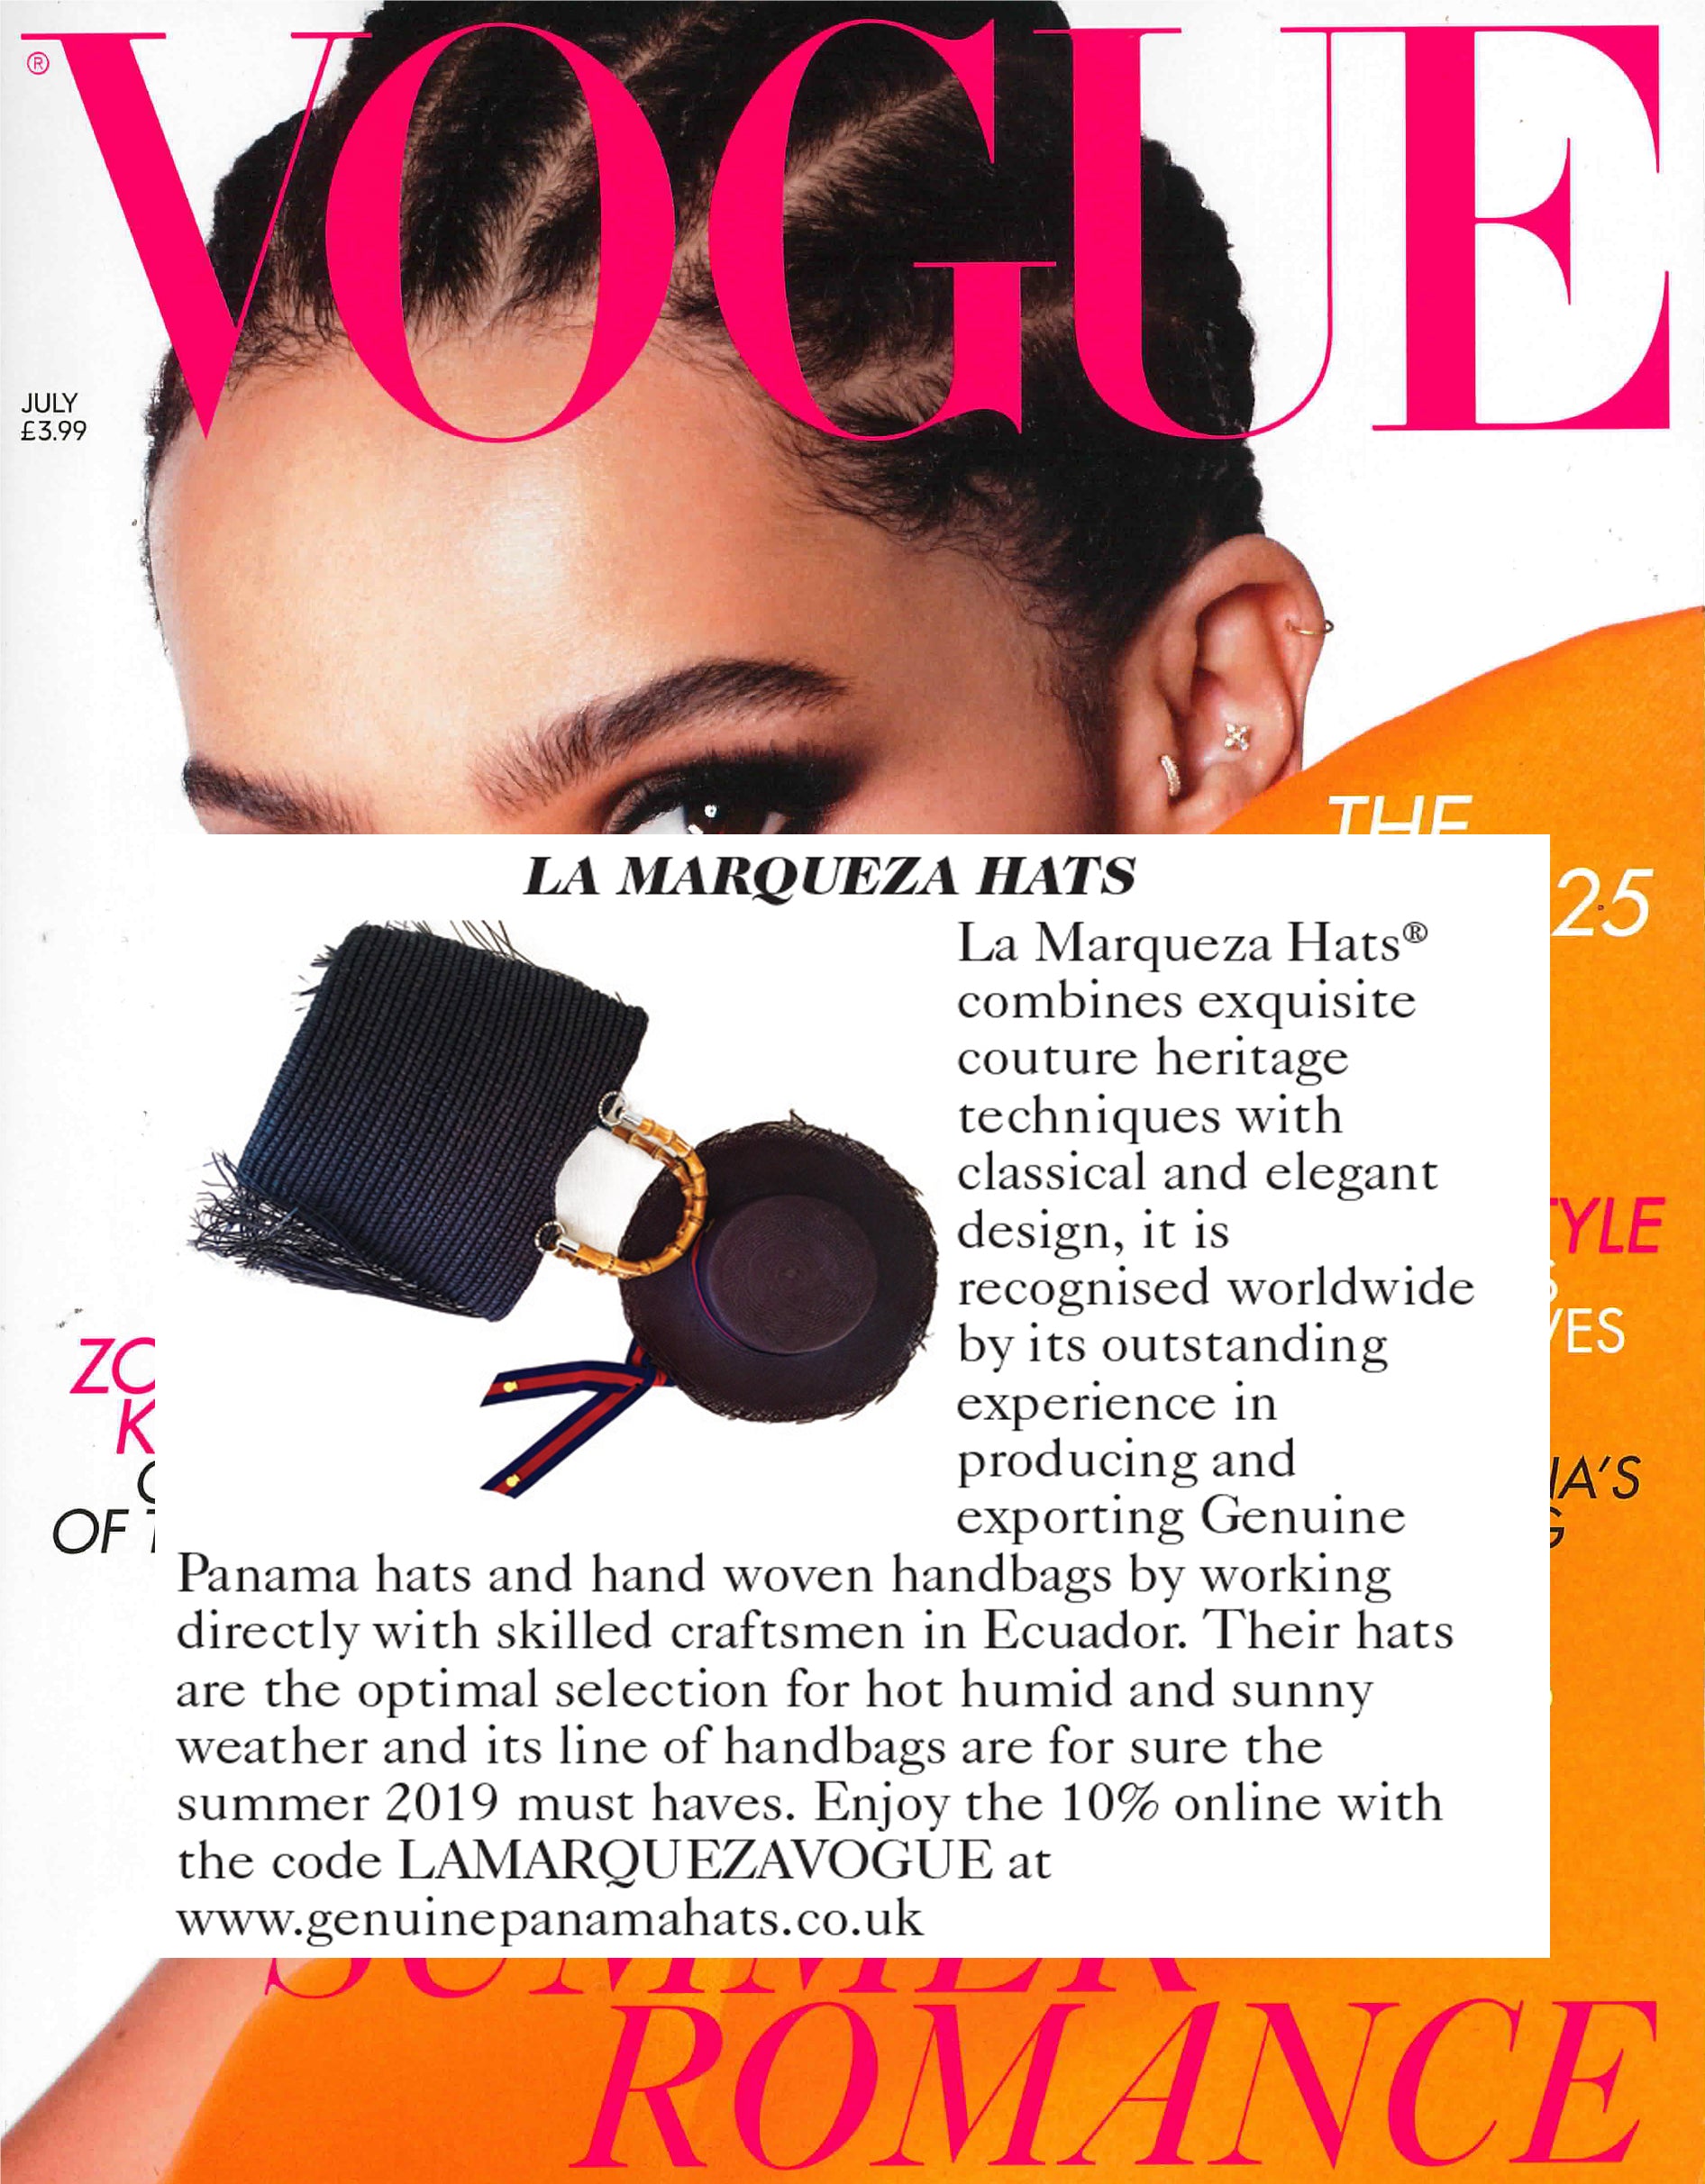 Best Packable Panama Hats in UK Vogue featured